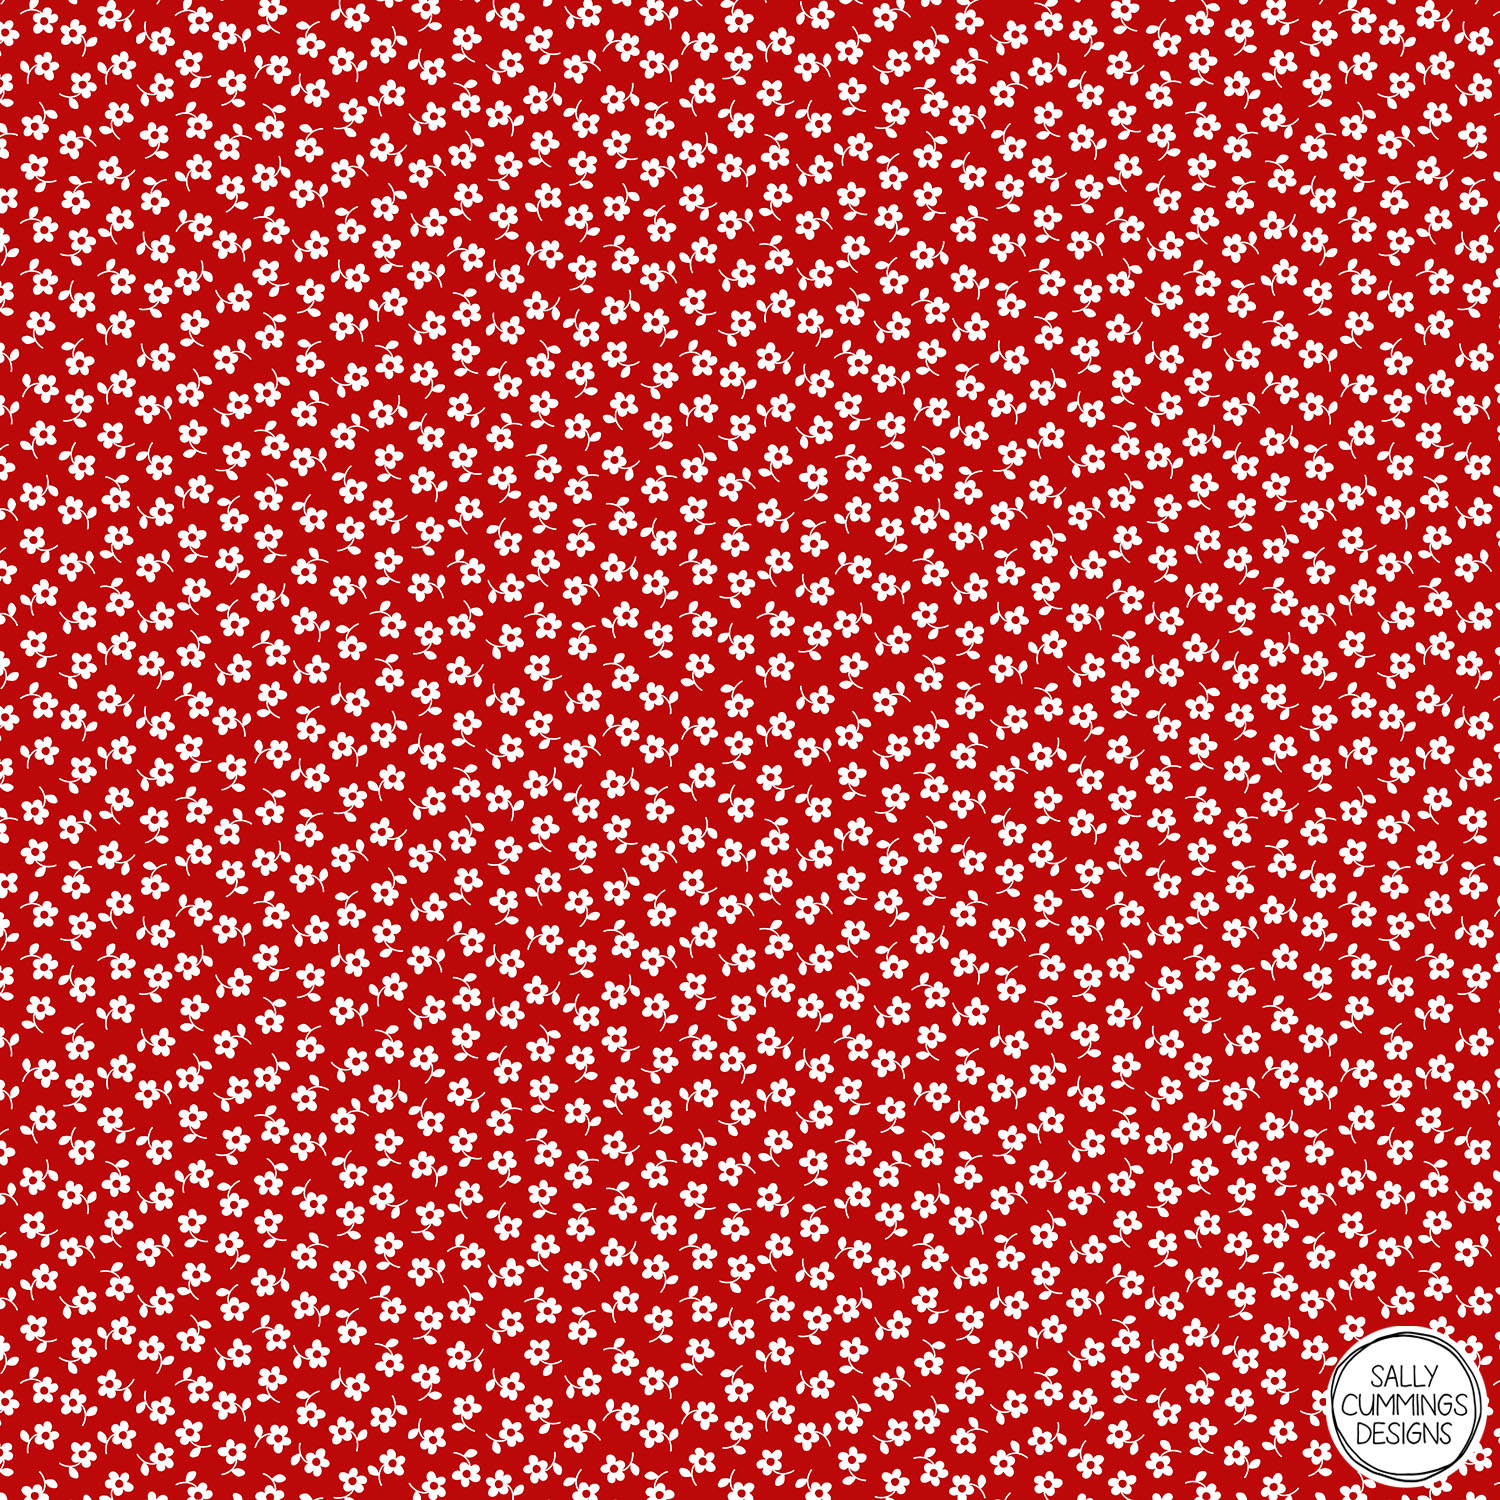 Sally Cummings Designs - Forget Me Nots Pattern (White on Red)